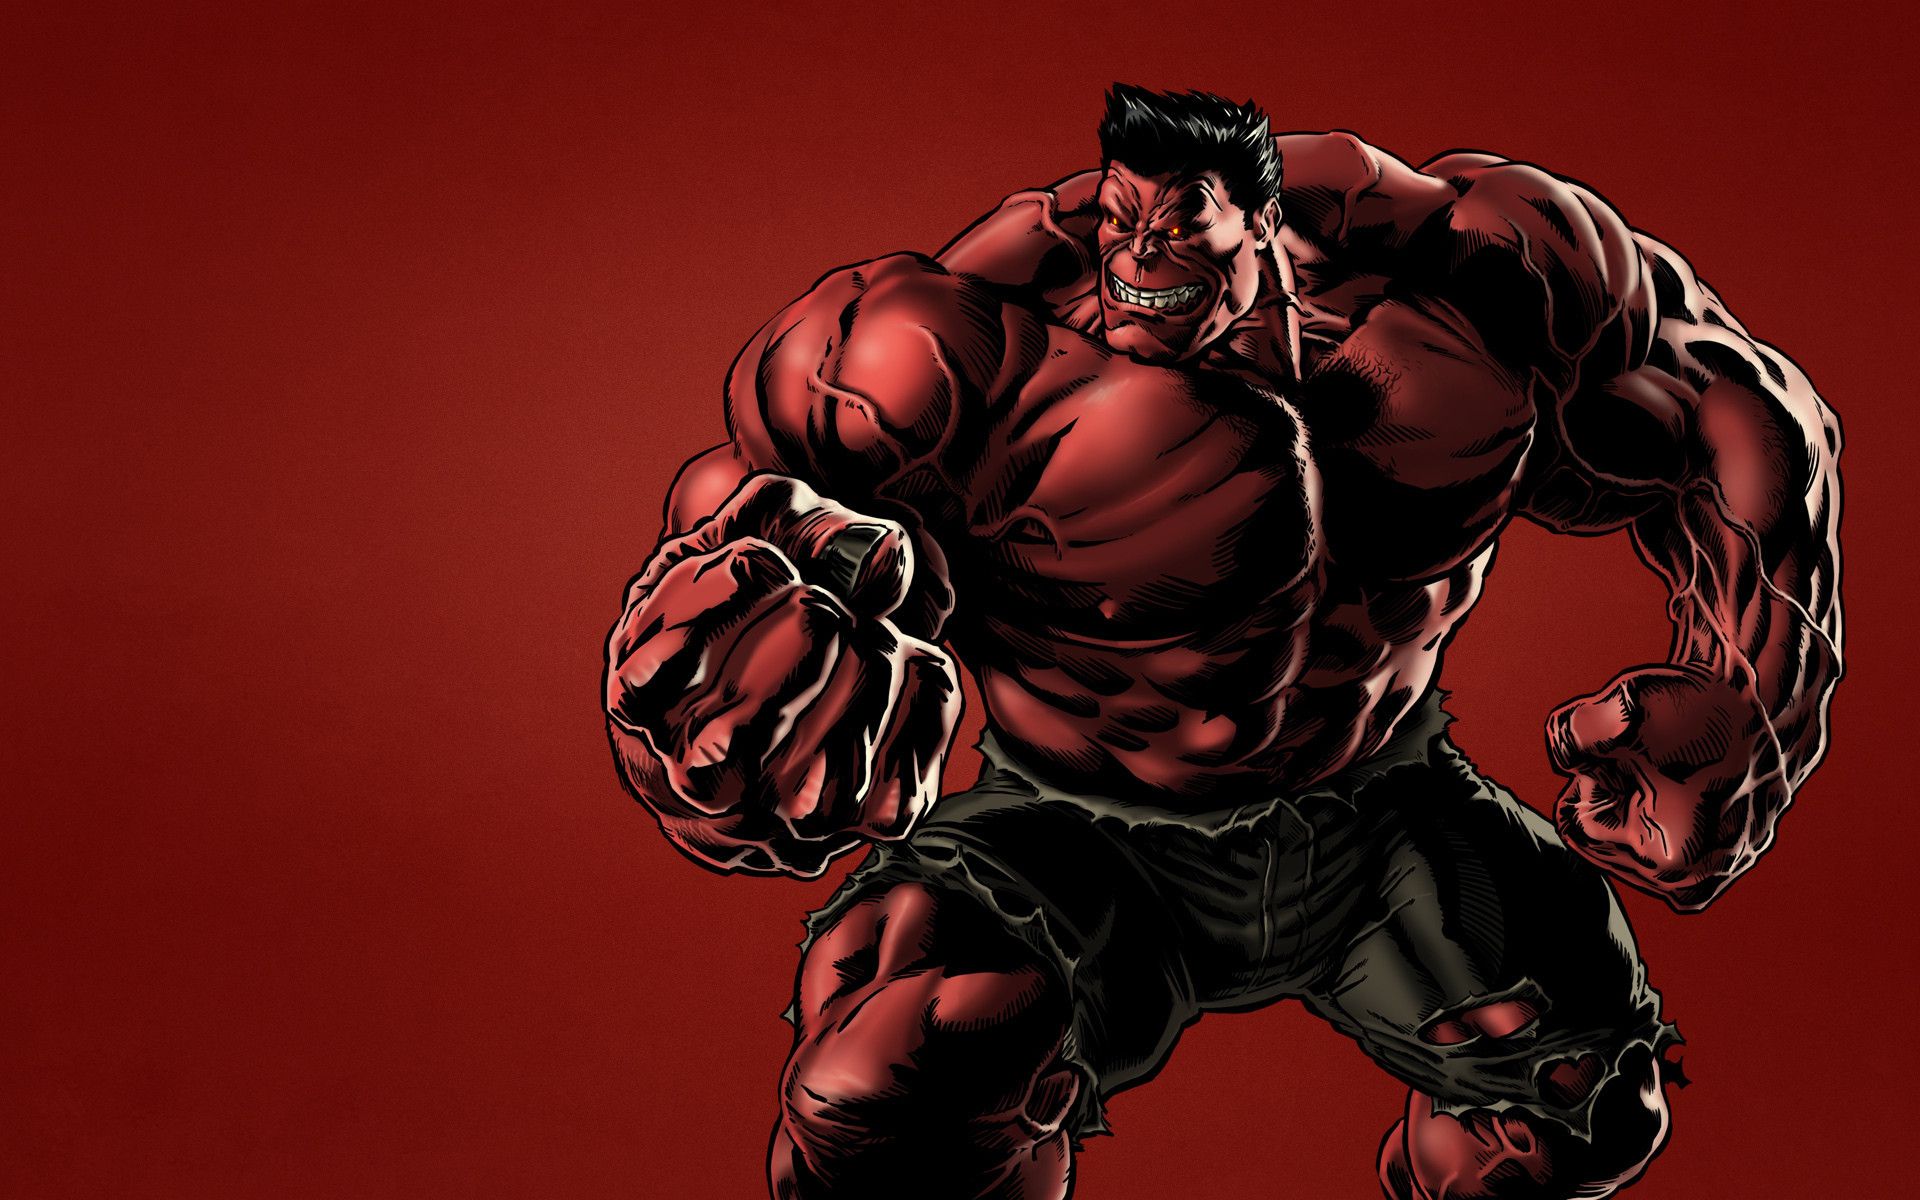 Download free hulk backgrounds pictures.